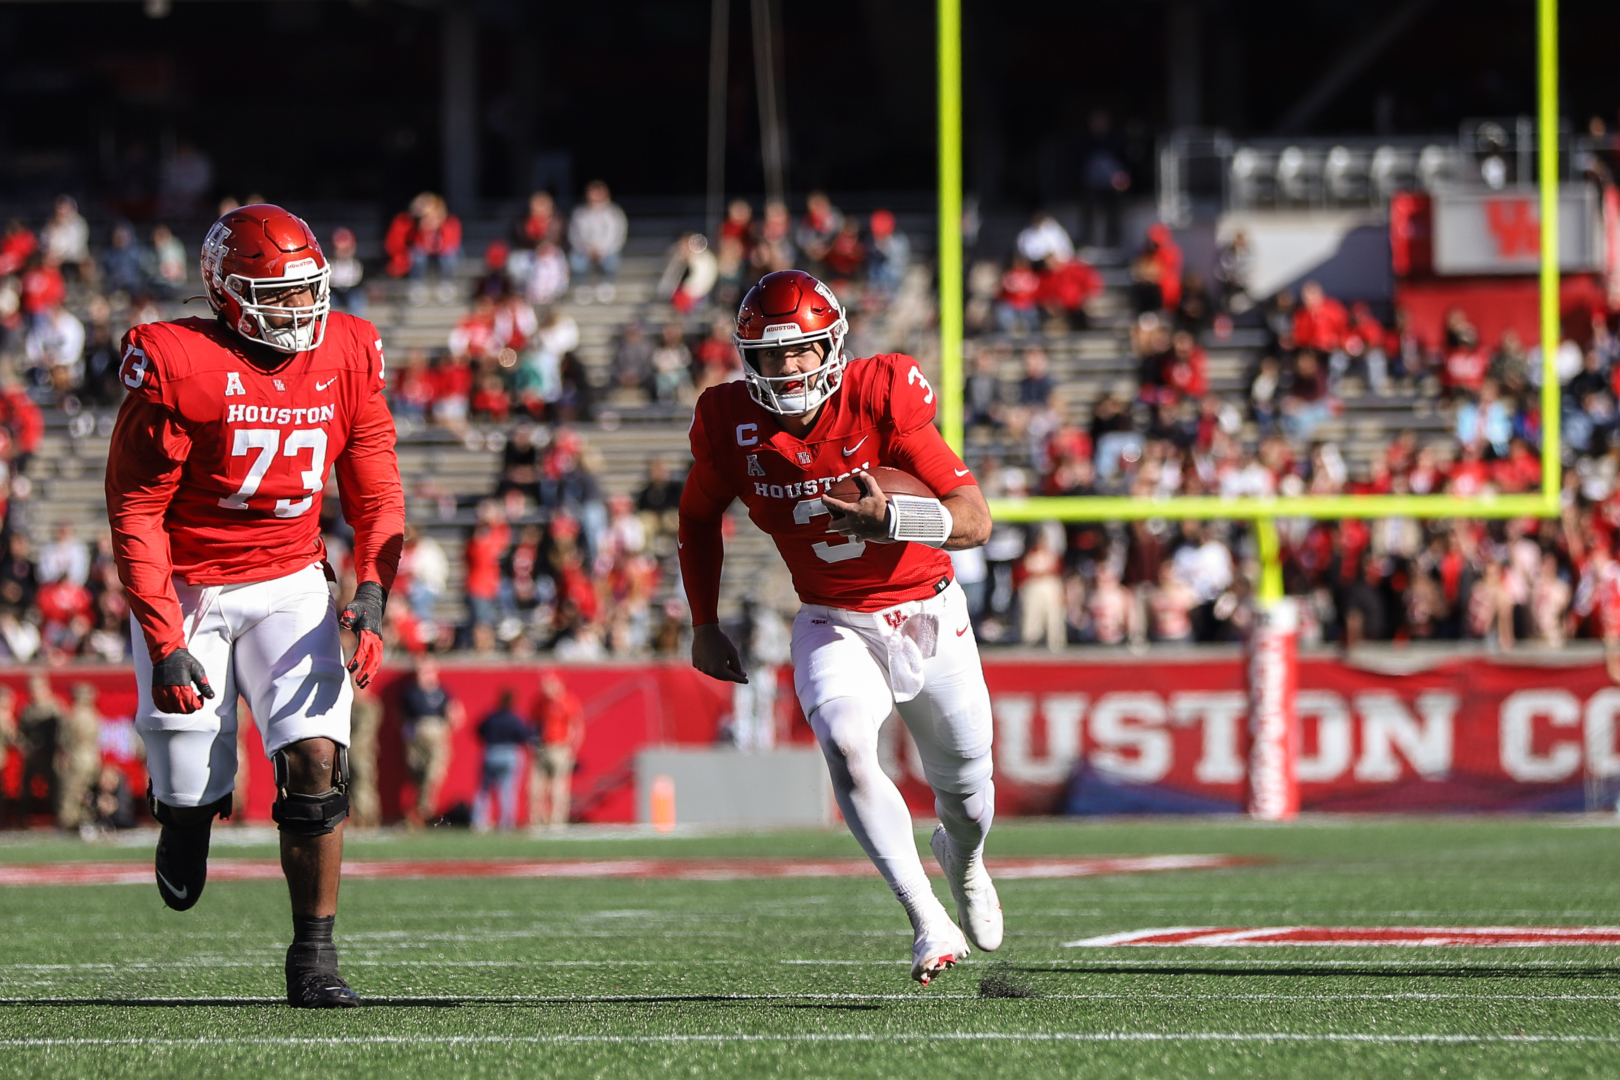 UH's Clayton Tune enters his final home game as one of the most decorated quarterbacks in AAC history. | Sean Thomas/The Cougar